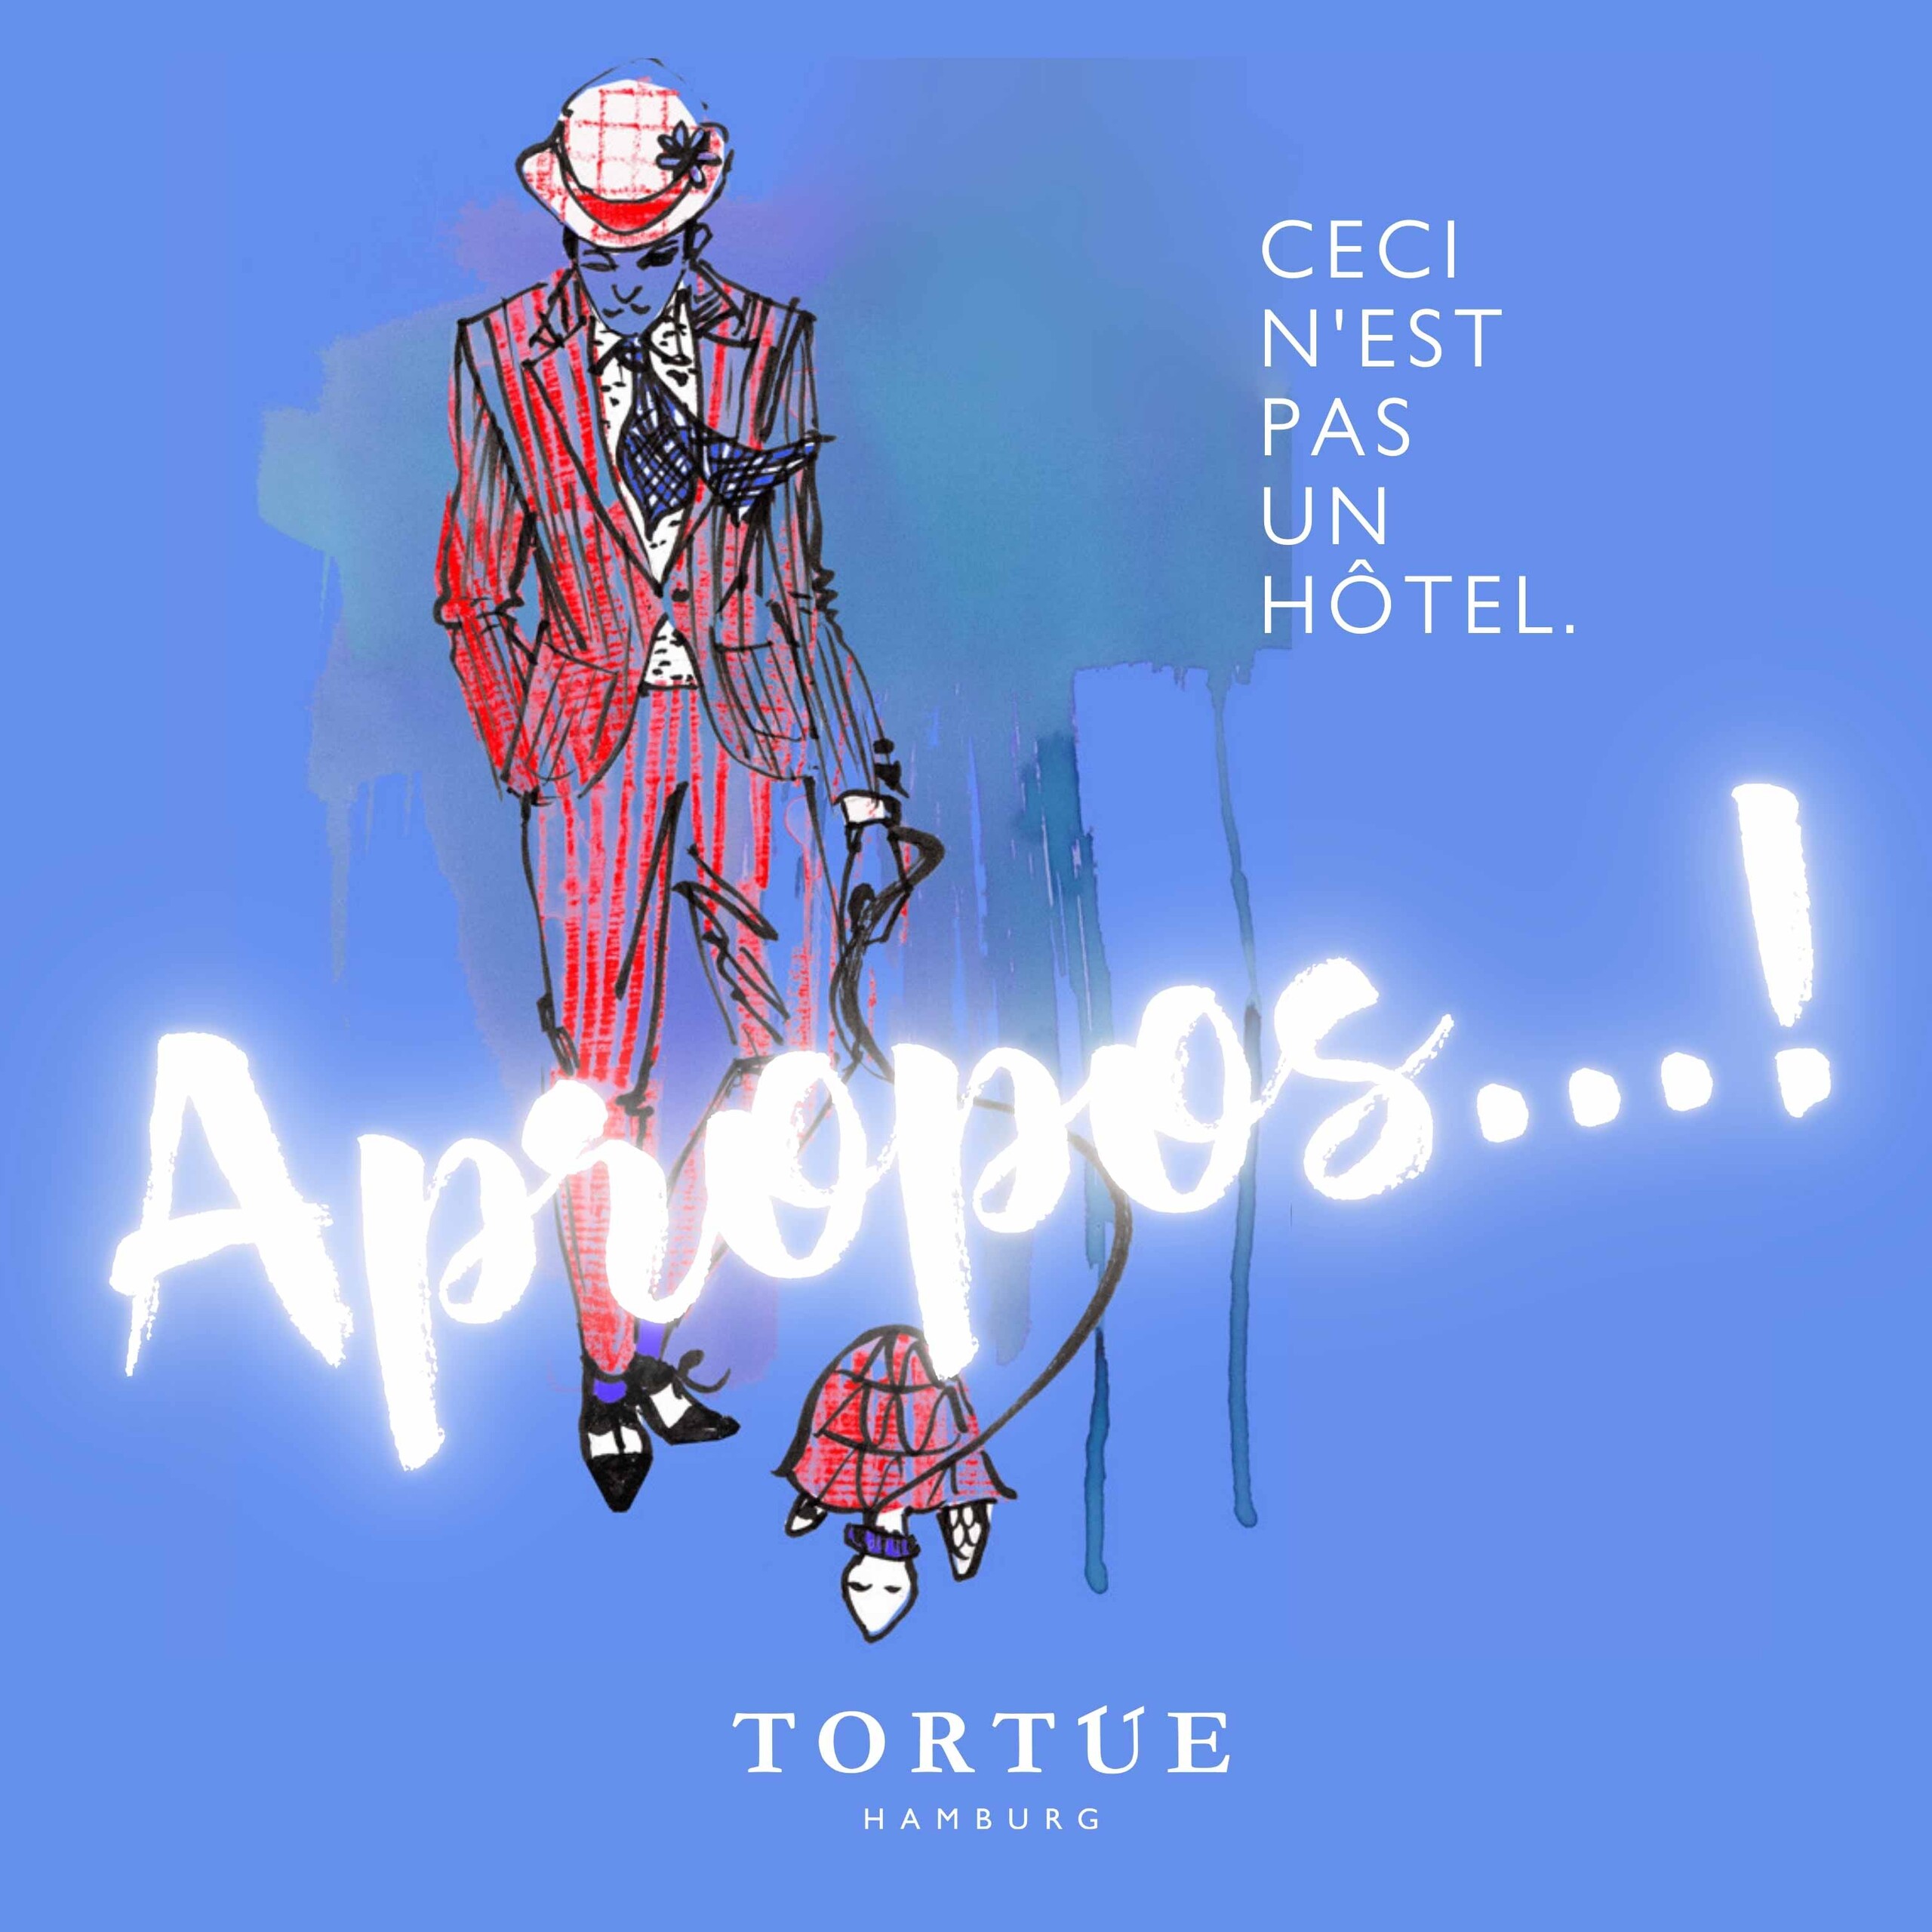 spotify podcast apropos of hotel tortue hamburg